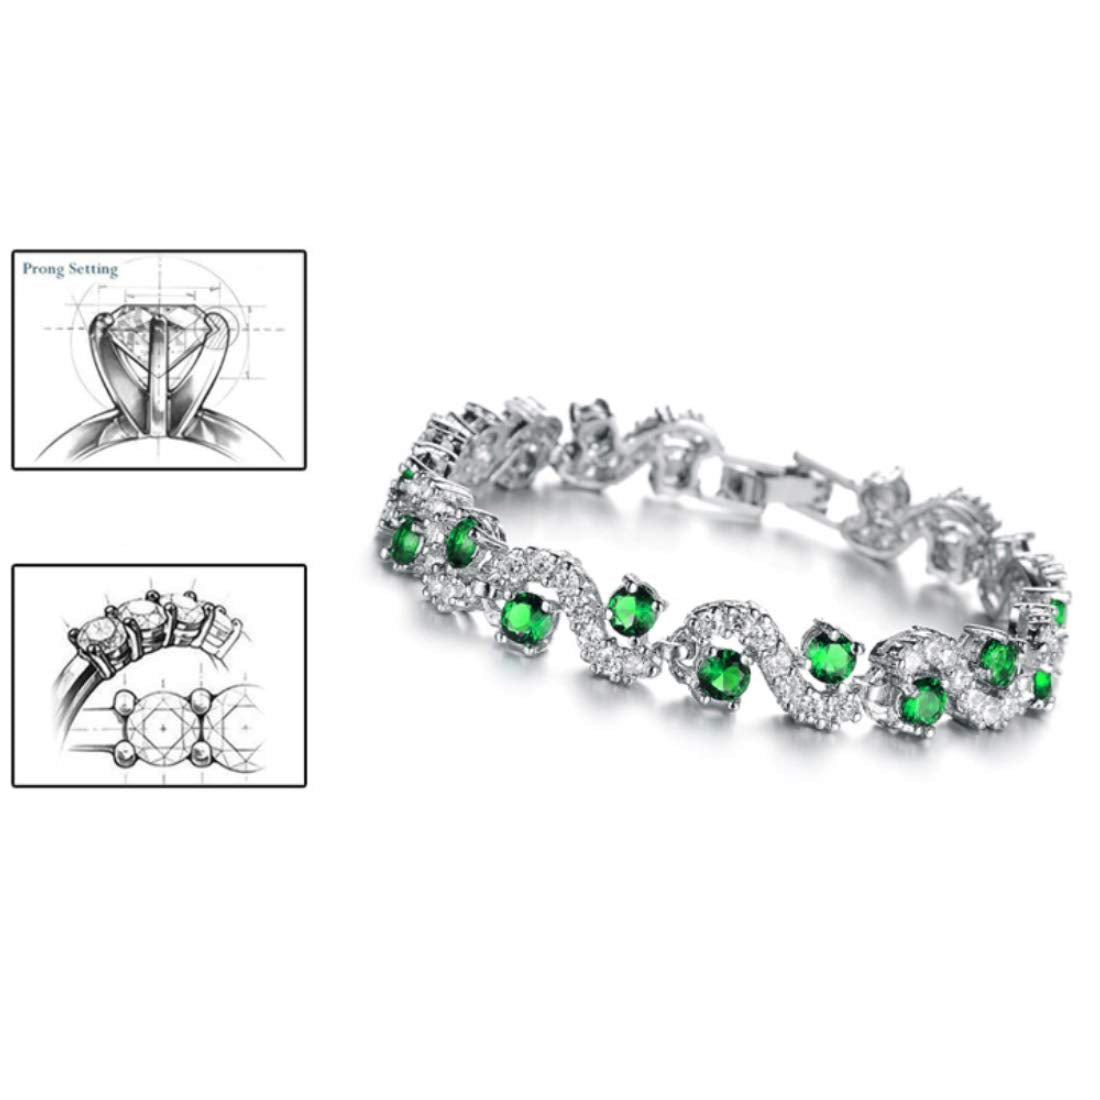 Platinum link chain bracelet with emerald green stone and cz 